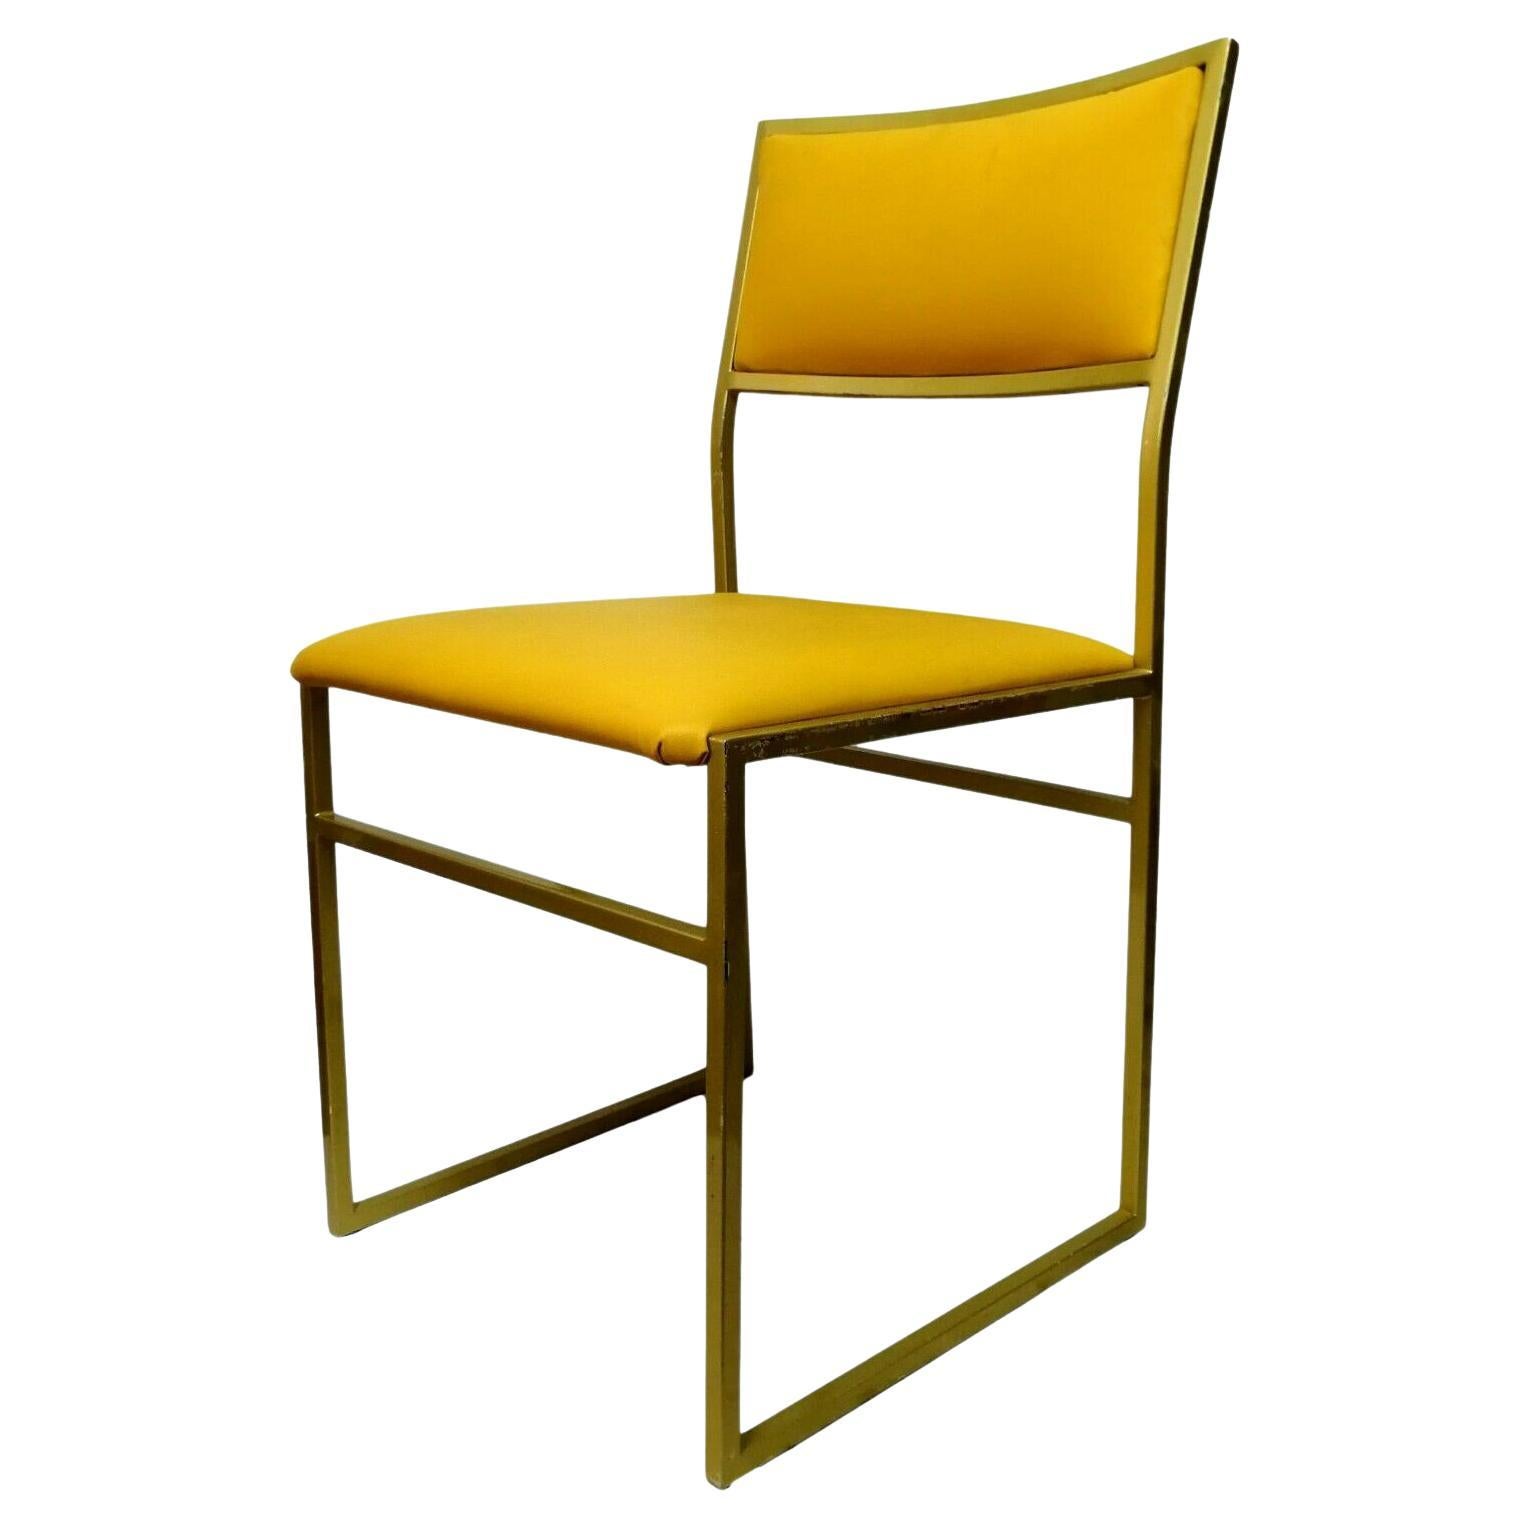 Collectible Chair in Gold Metal and Yellow Upholstery, 1970s For Sale